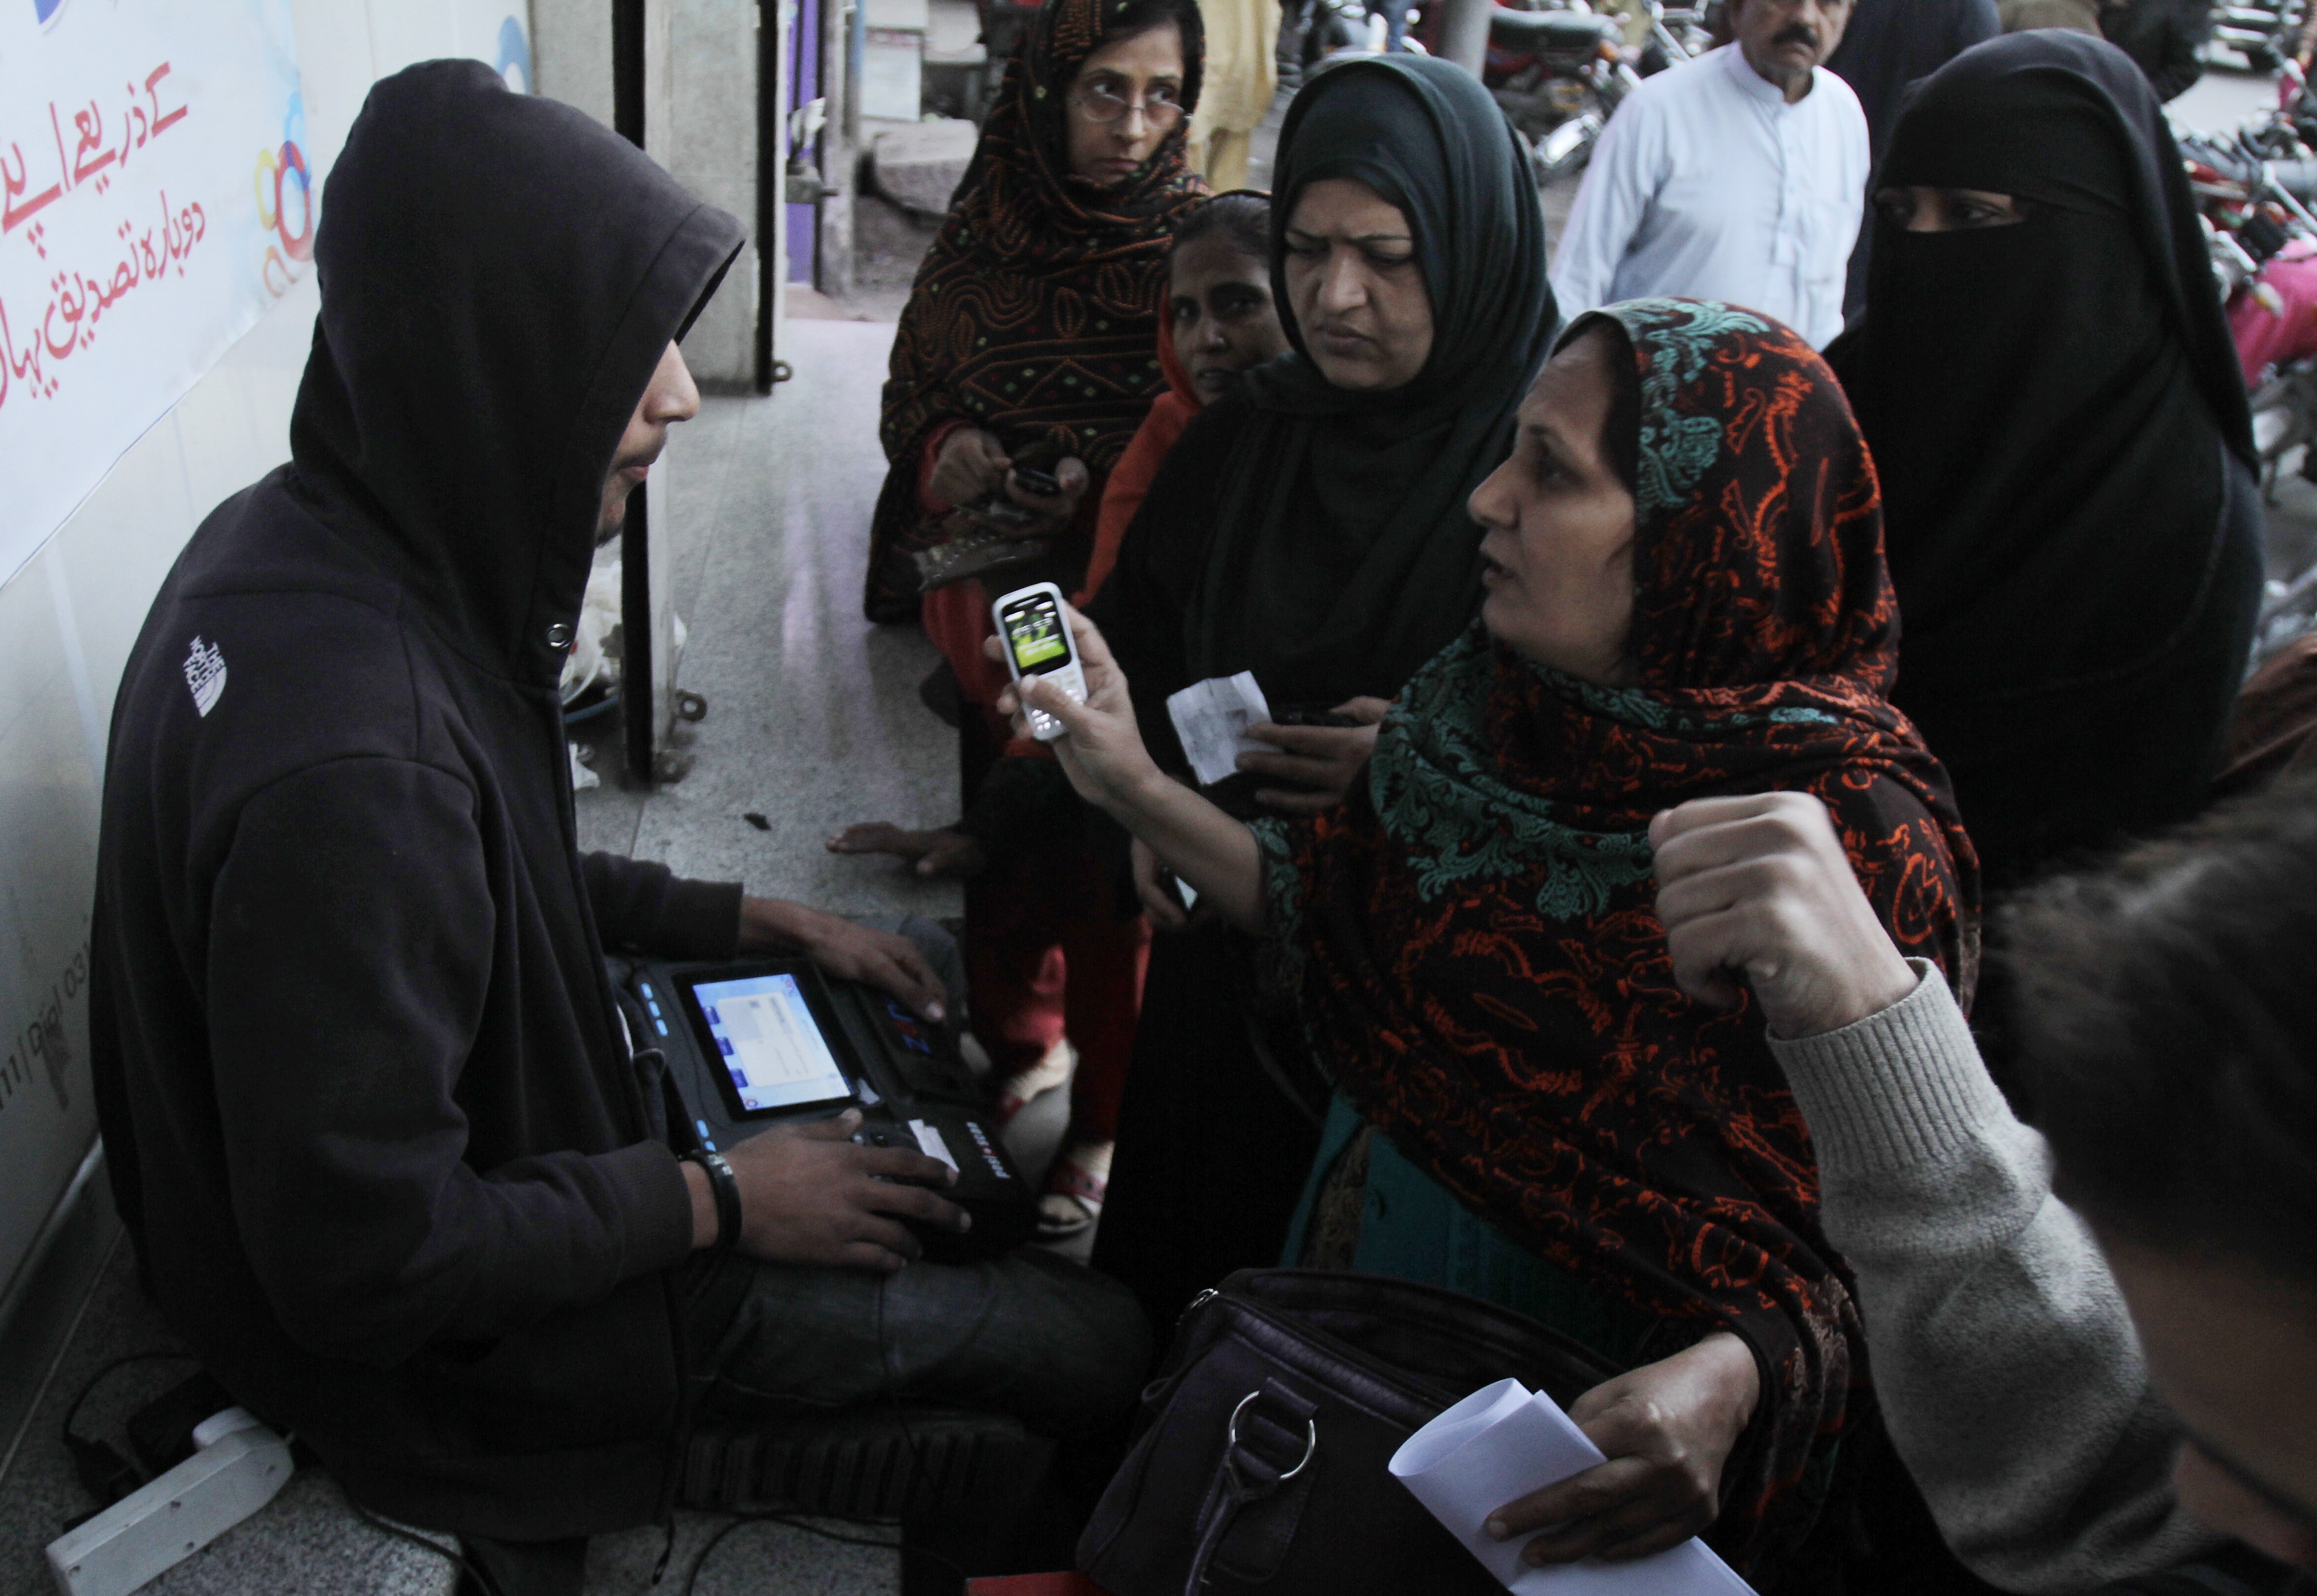 In this 25 February 2015 photo, people get their cell phone SIM cards verified in Lahore, Pakistan, AP Photo/K.M. Chaudary